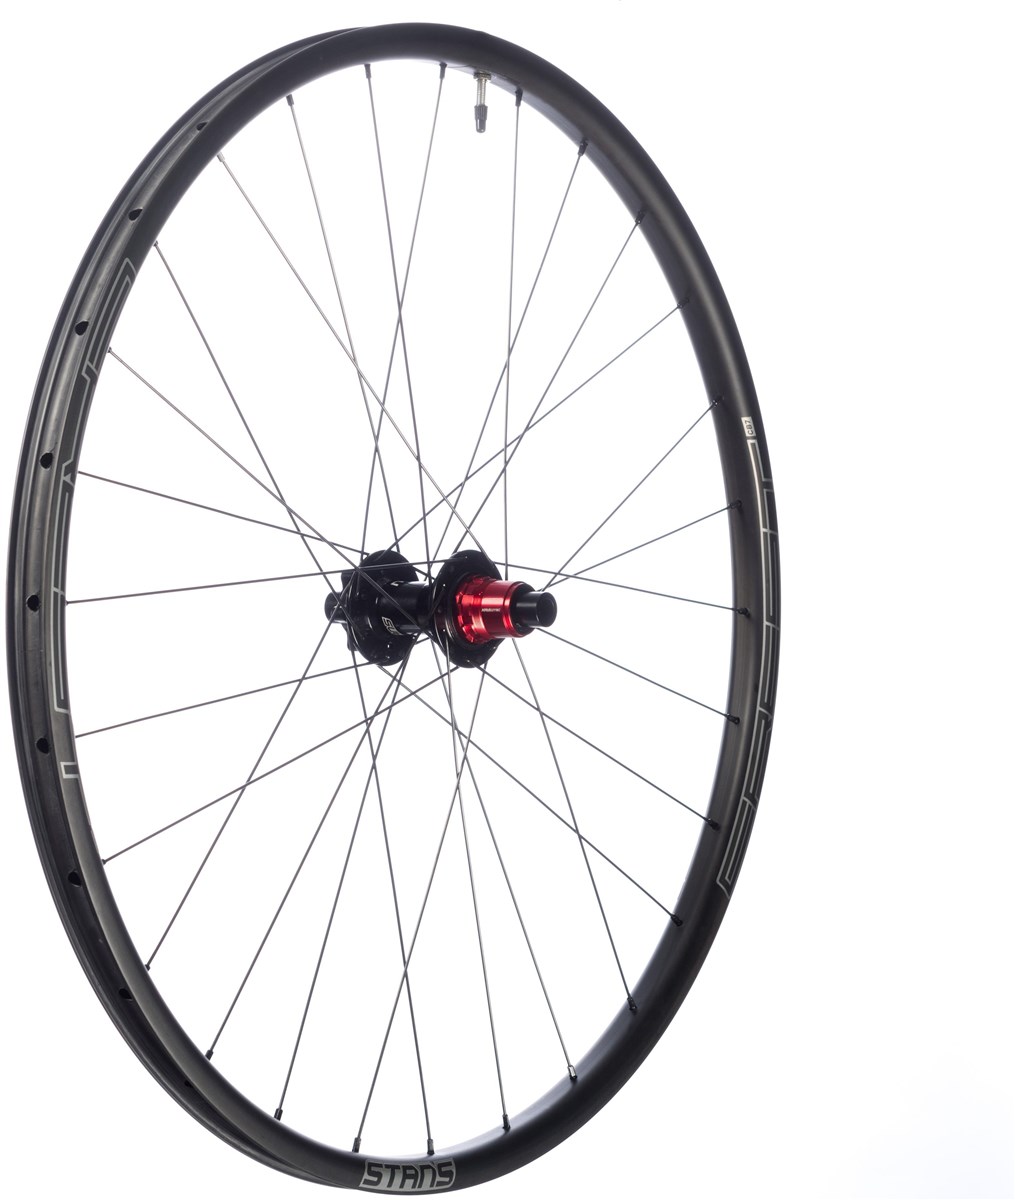 Stans NoTubes Crest CB7 29" Wheel product image